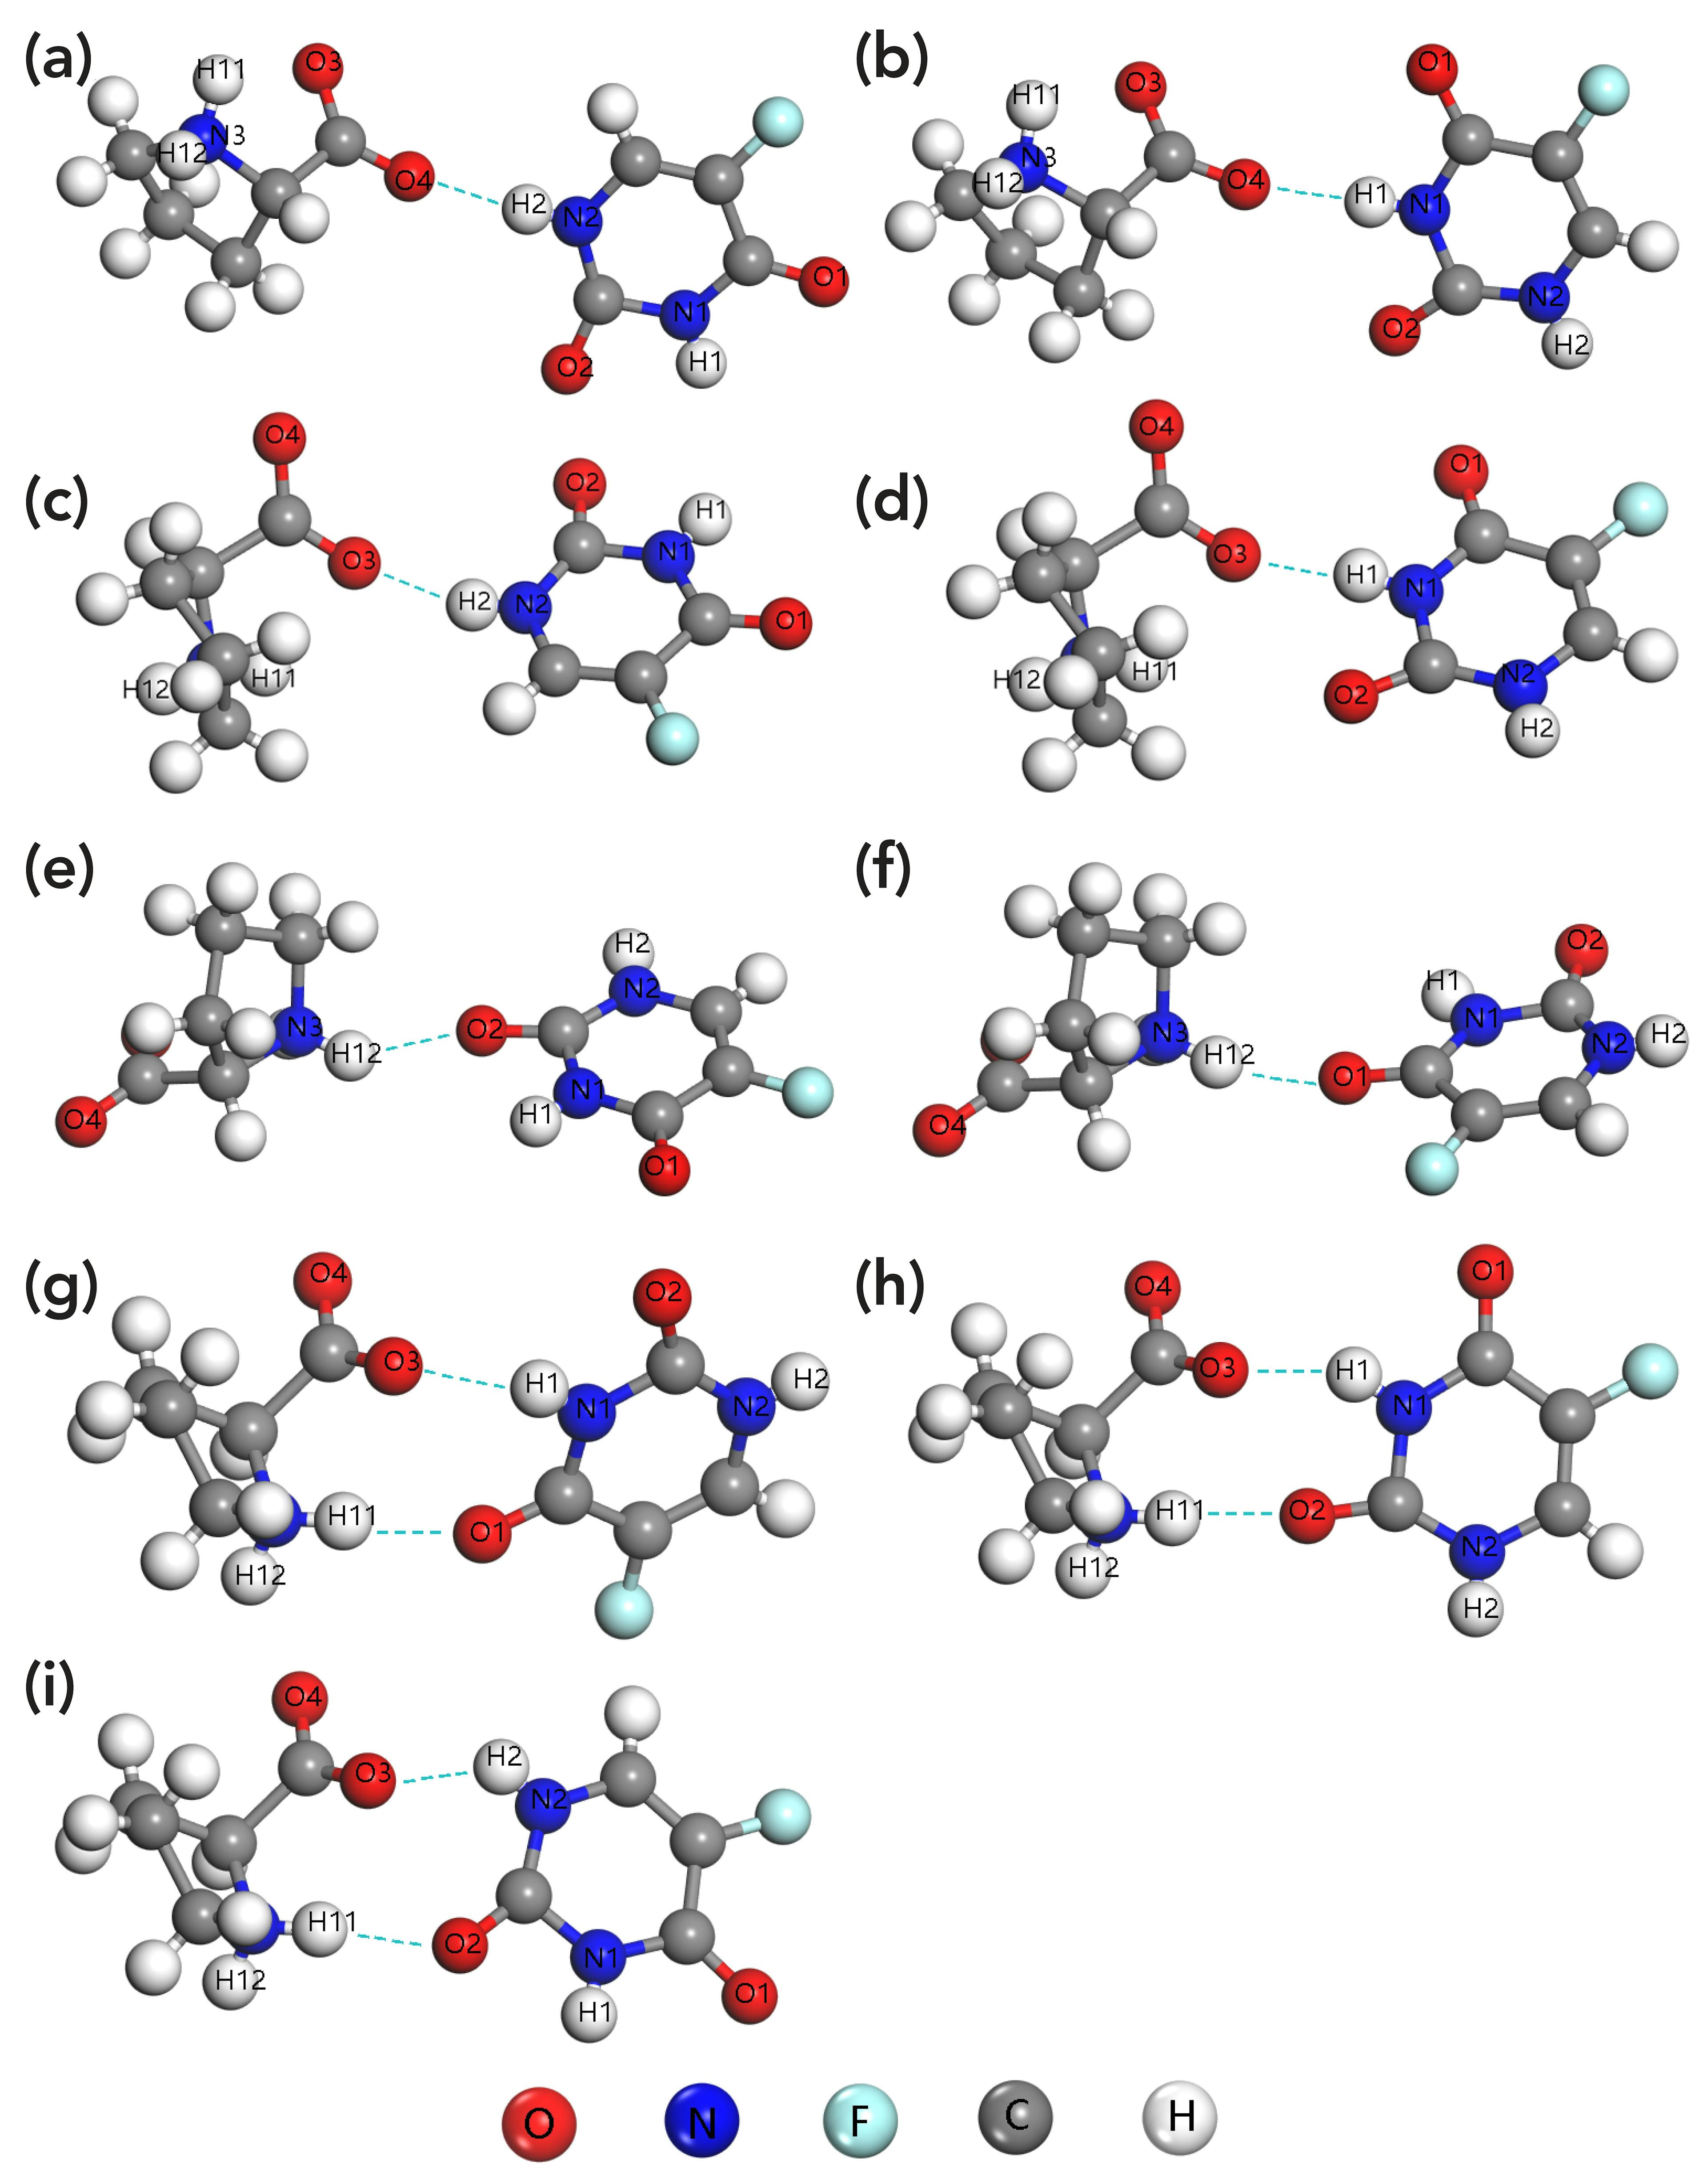 FIGURE 5: The hydrogen bonding mode of theoretical configuration (a) 1, (b) 2, (c) 3, (d) 4, (e) 5, (f) 6, (g) 7, (h) 8, (i) 9. The color code for atoms is given in the figure.